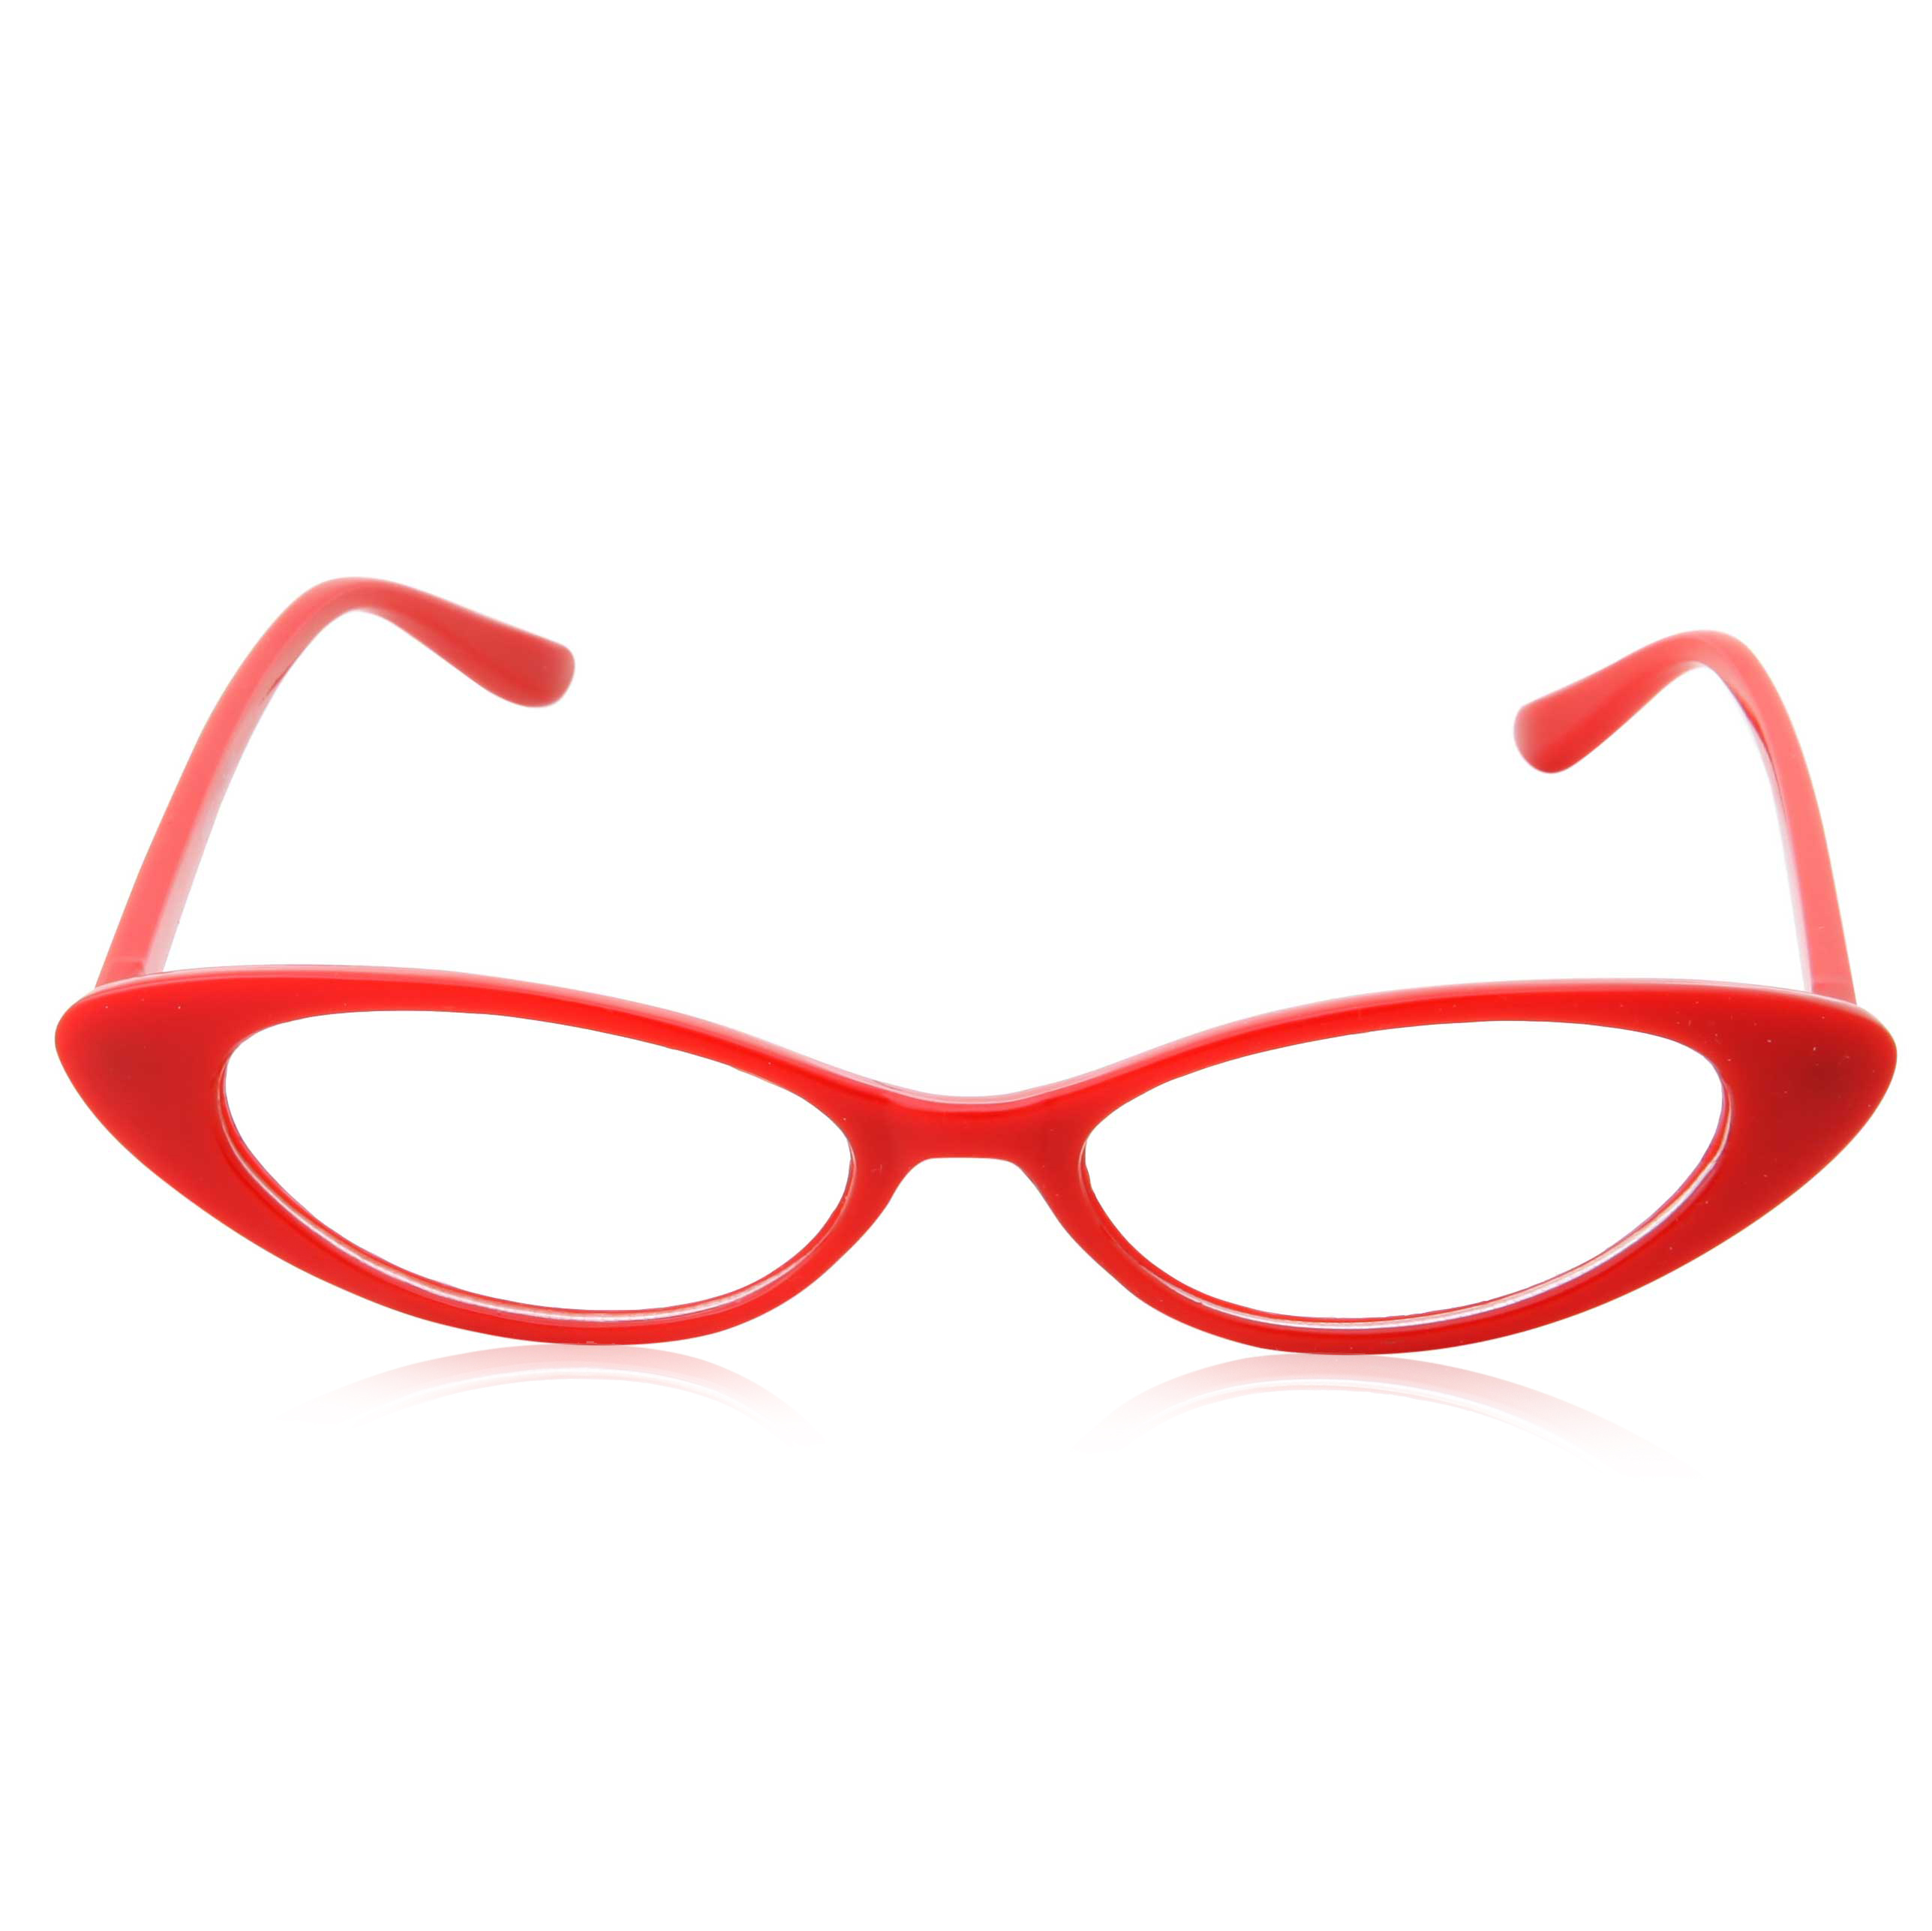 grinderPUNCH Retro 90s Red Slim Flat Clear Lens Cat Eye Sunglasses - image 3 of 5